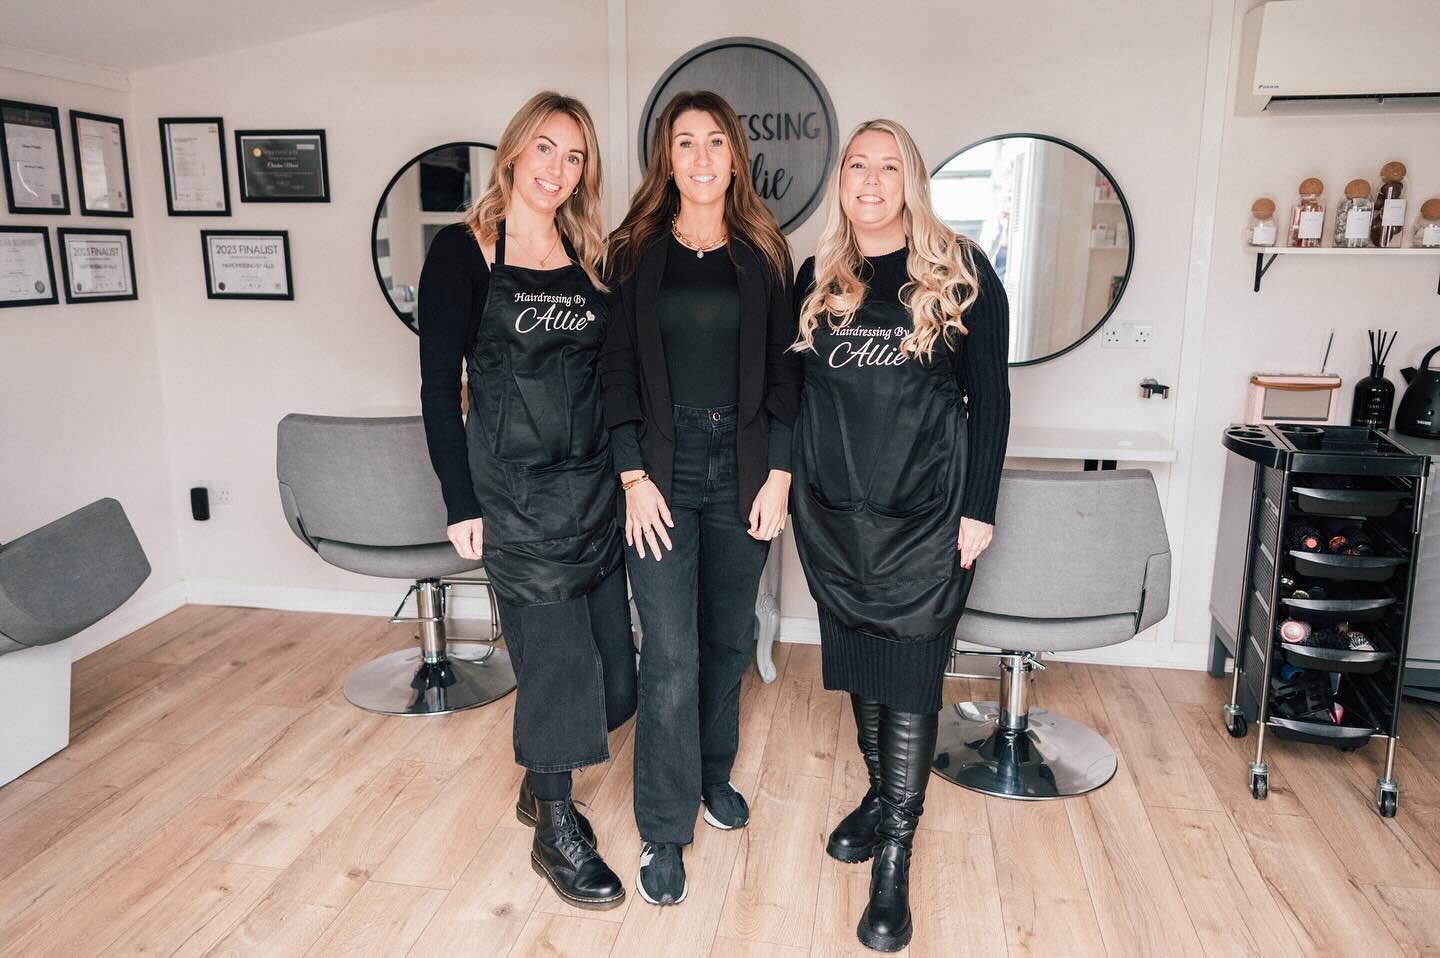 ℳℯℯ𝓉 𝓉𝒽ℯ 𝓉ℯ𝒶𝓂 ♡︎

𝒜𝓁𝓁𝒾ℯ 

OWNER &amp; STYLIST
Meet Allie, the creative force and owner of Hair by Allie. 
* 18 years of experience
* Headmasters trained
* L&rsquo;Or&eacute;al colour-degree &amp; Balayage specialist
* NVQ levels 1, 2, and 3